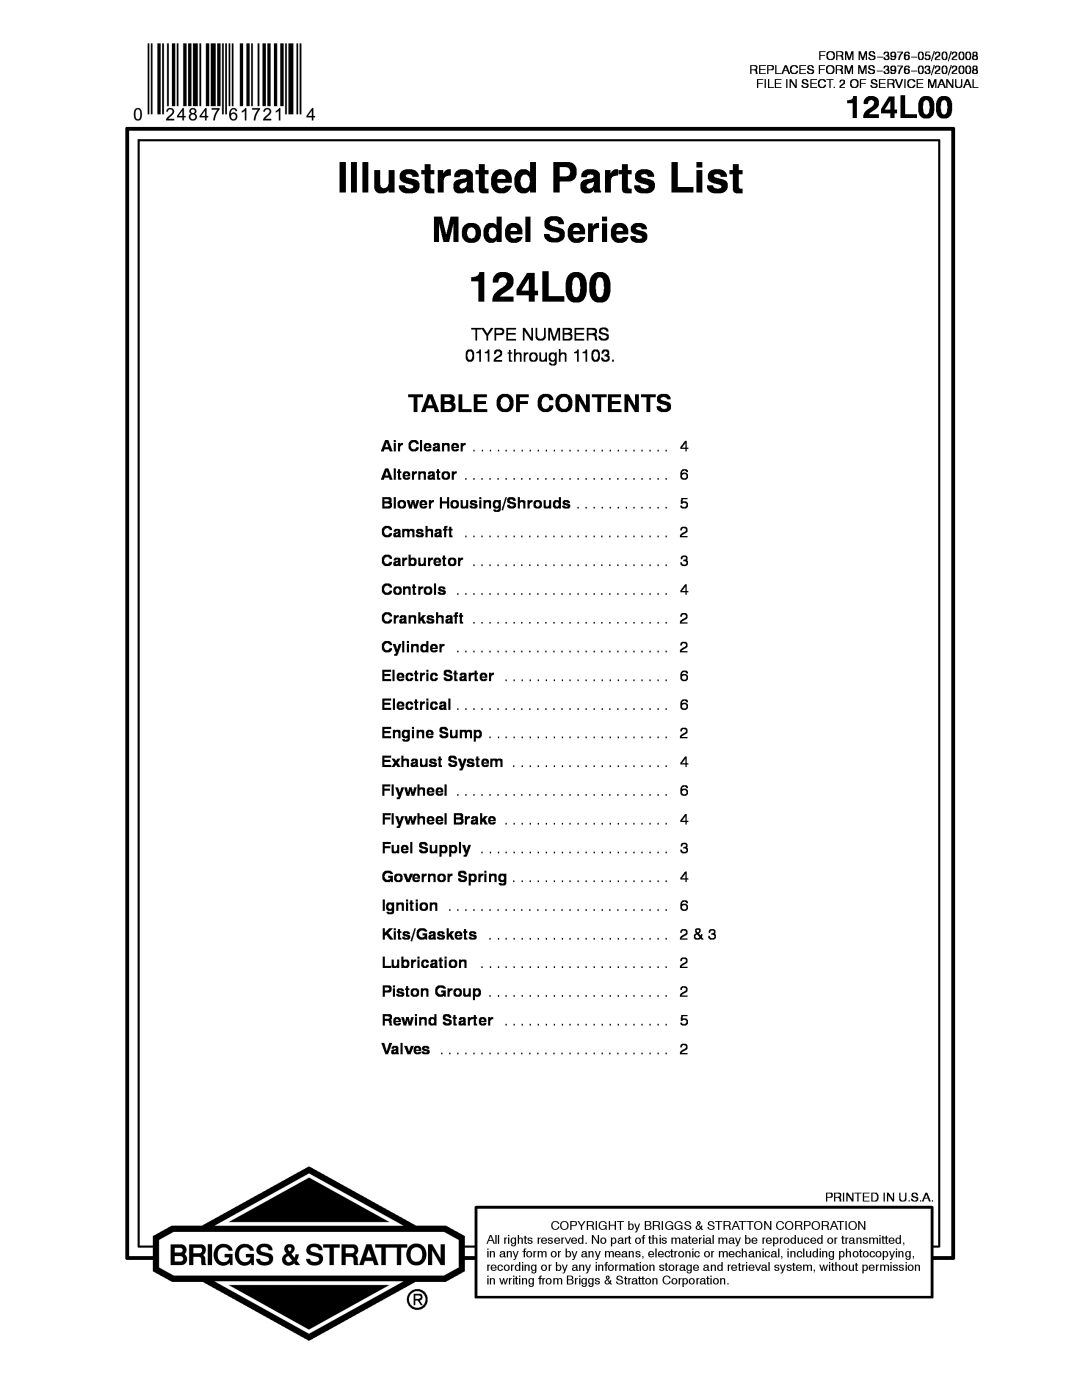 Briggs & Stratton 124L00 service manual Illustrated Parts List, Model Series, Table Of Contents, TYPE NUMBERS 0112 through 